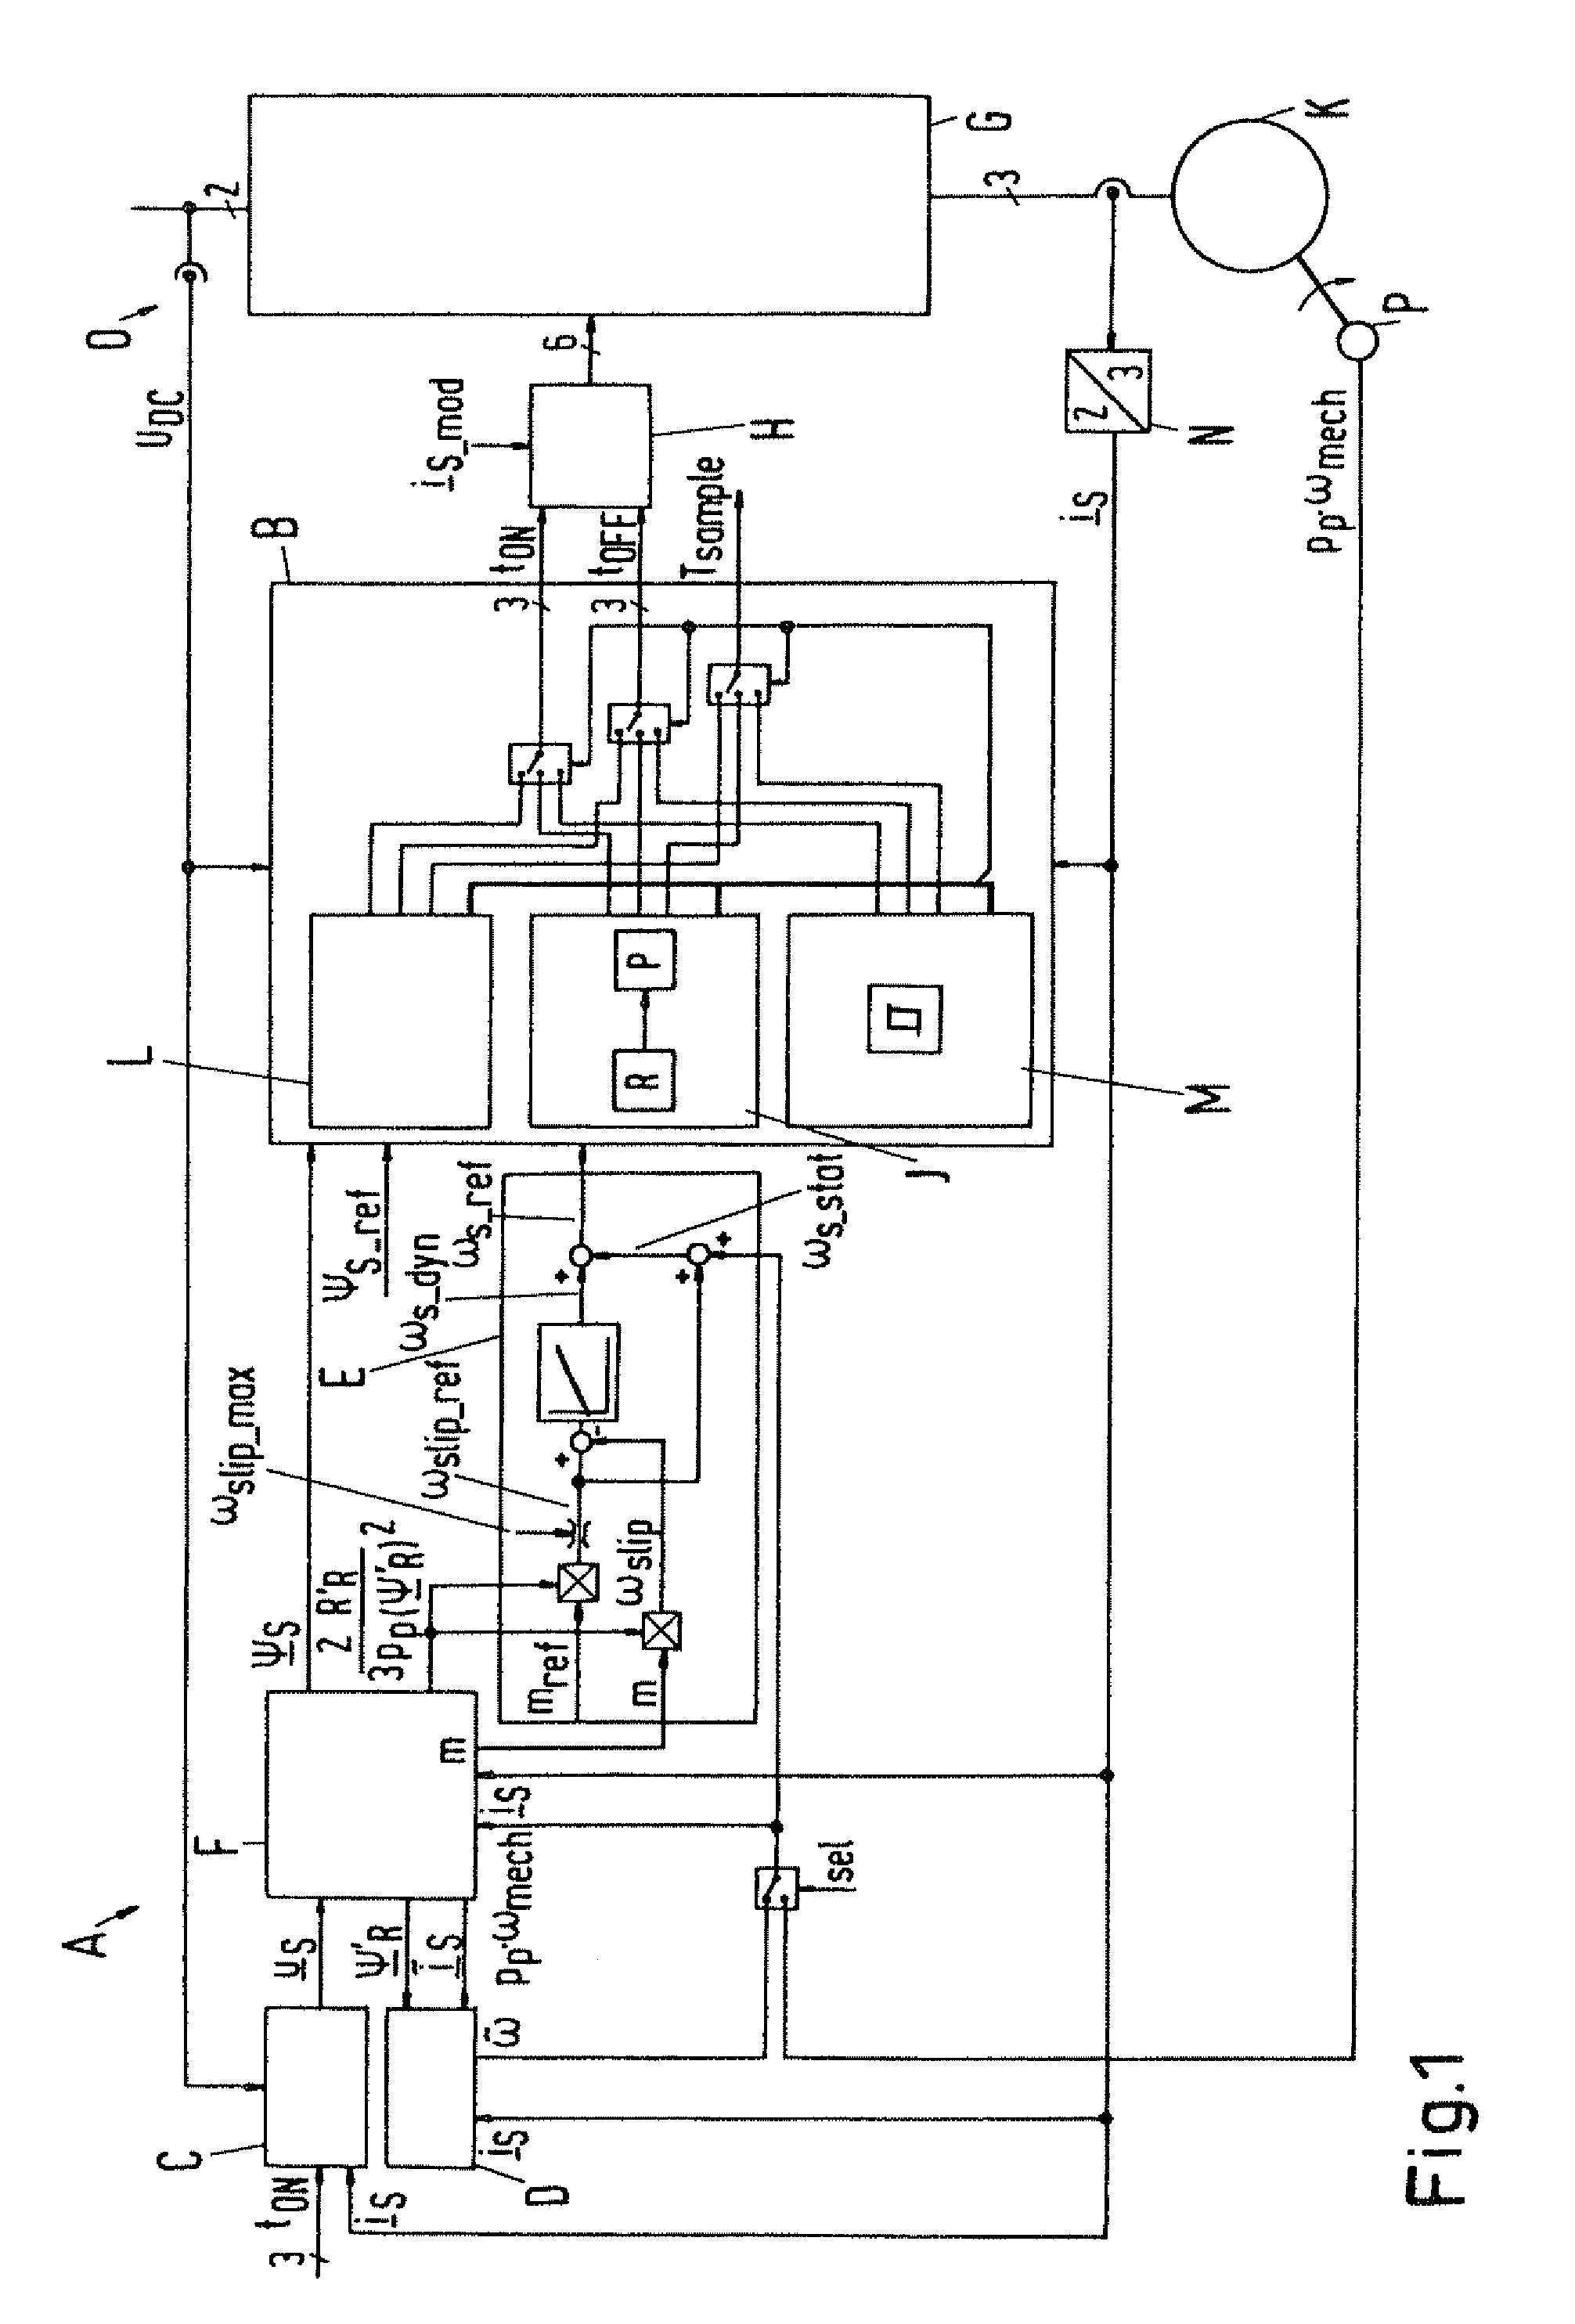 Open-loop and/or closed-loop control system of a 3-phase power converter for the operation of an asynchronous machine